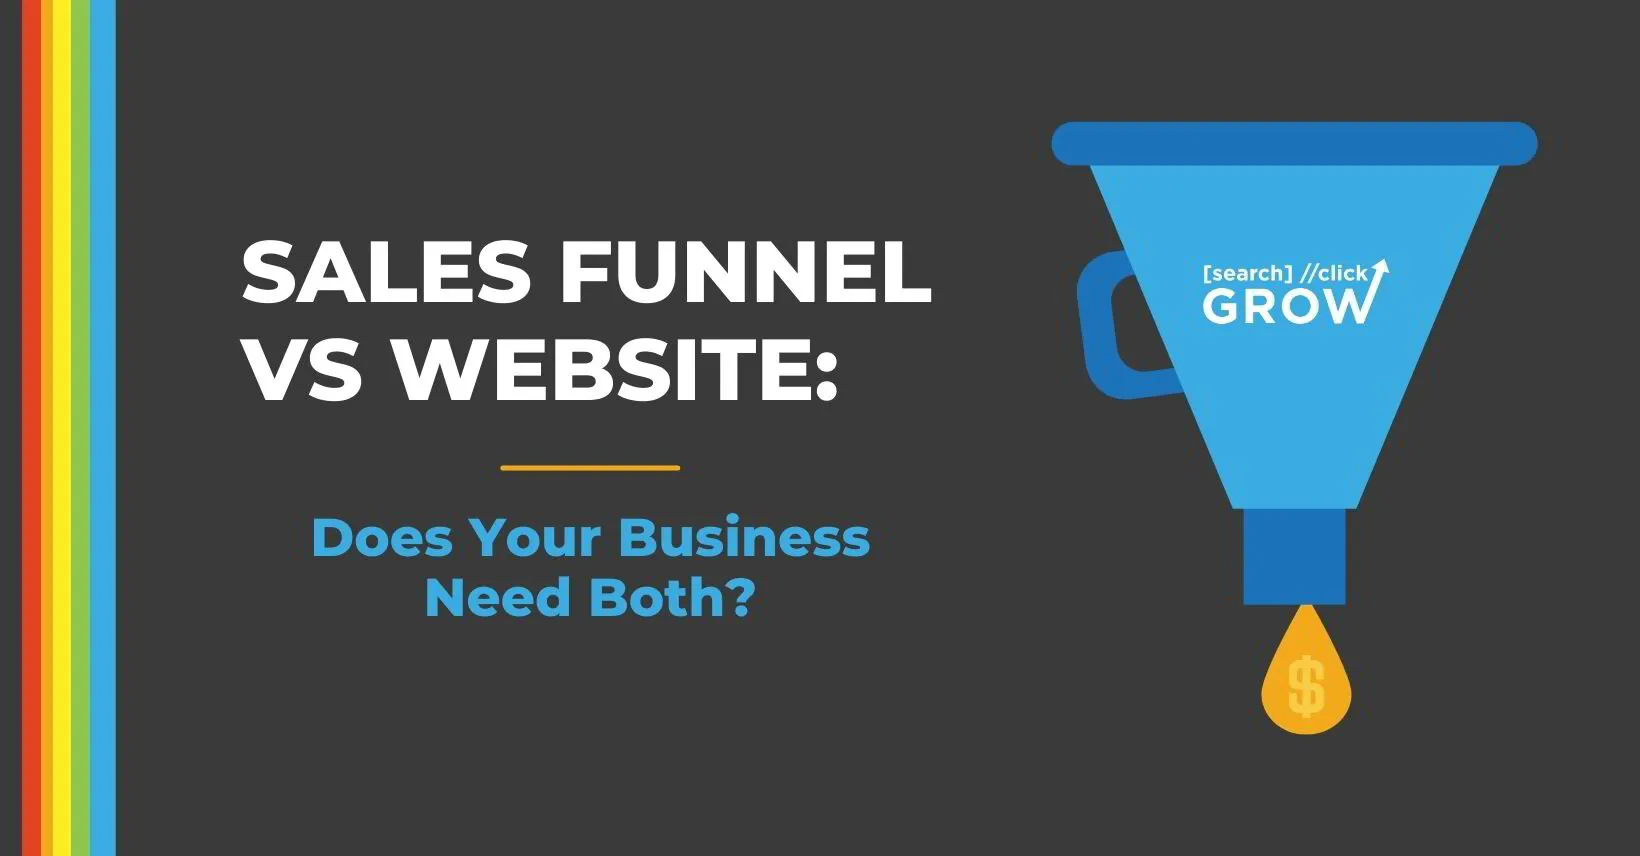 Sales Funnel vs Website: Does Your Business Need Both?